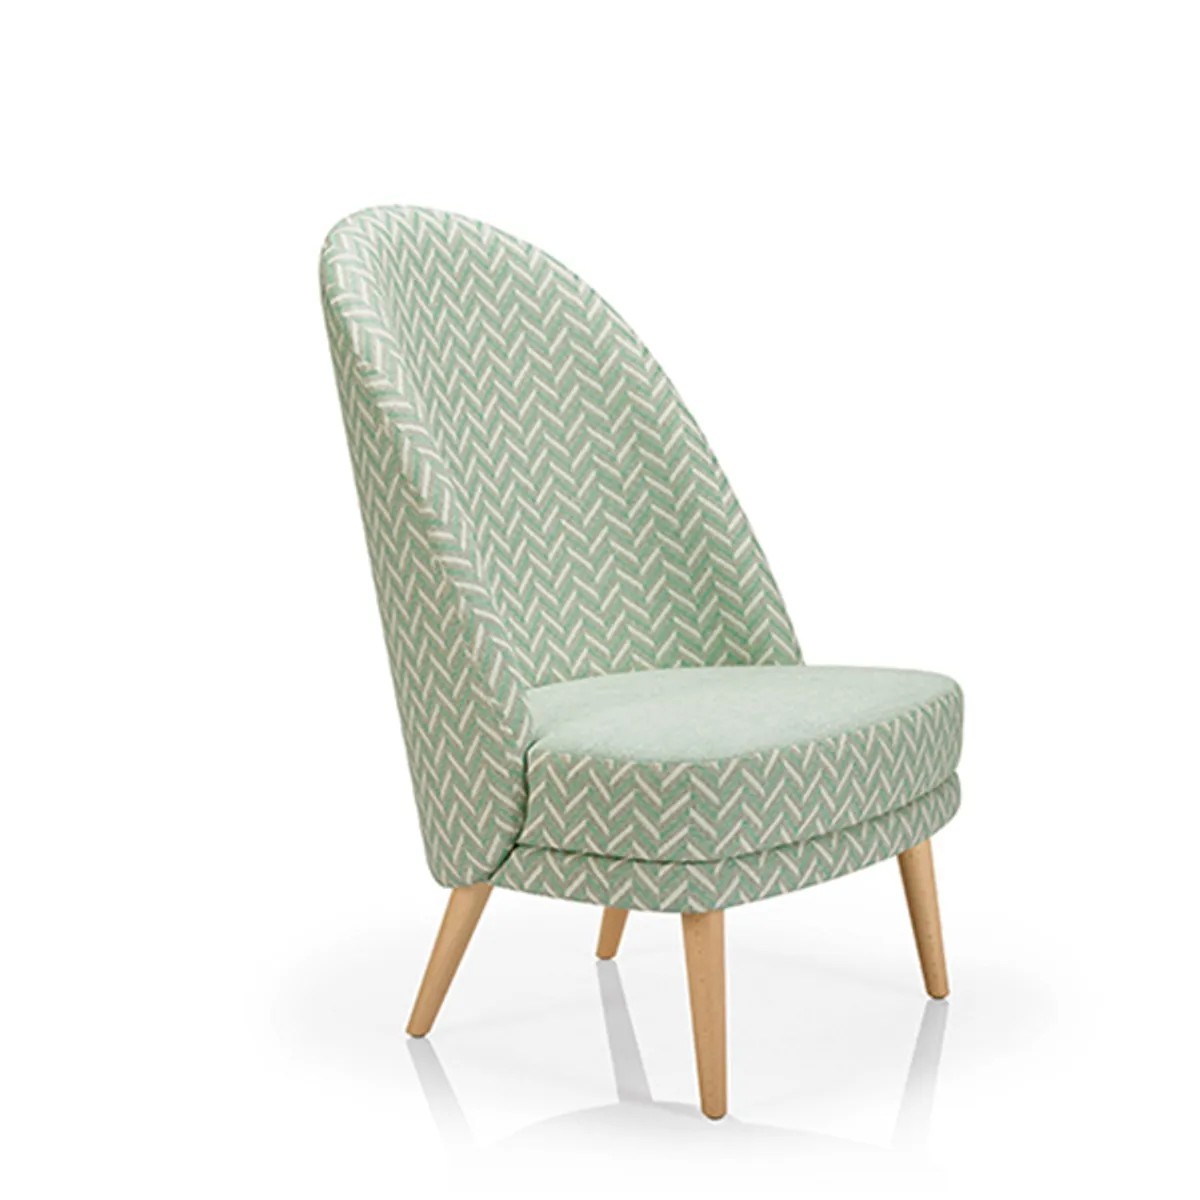 Del Rey High Back Chair By Inside Out Contracts